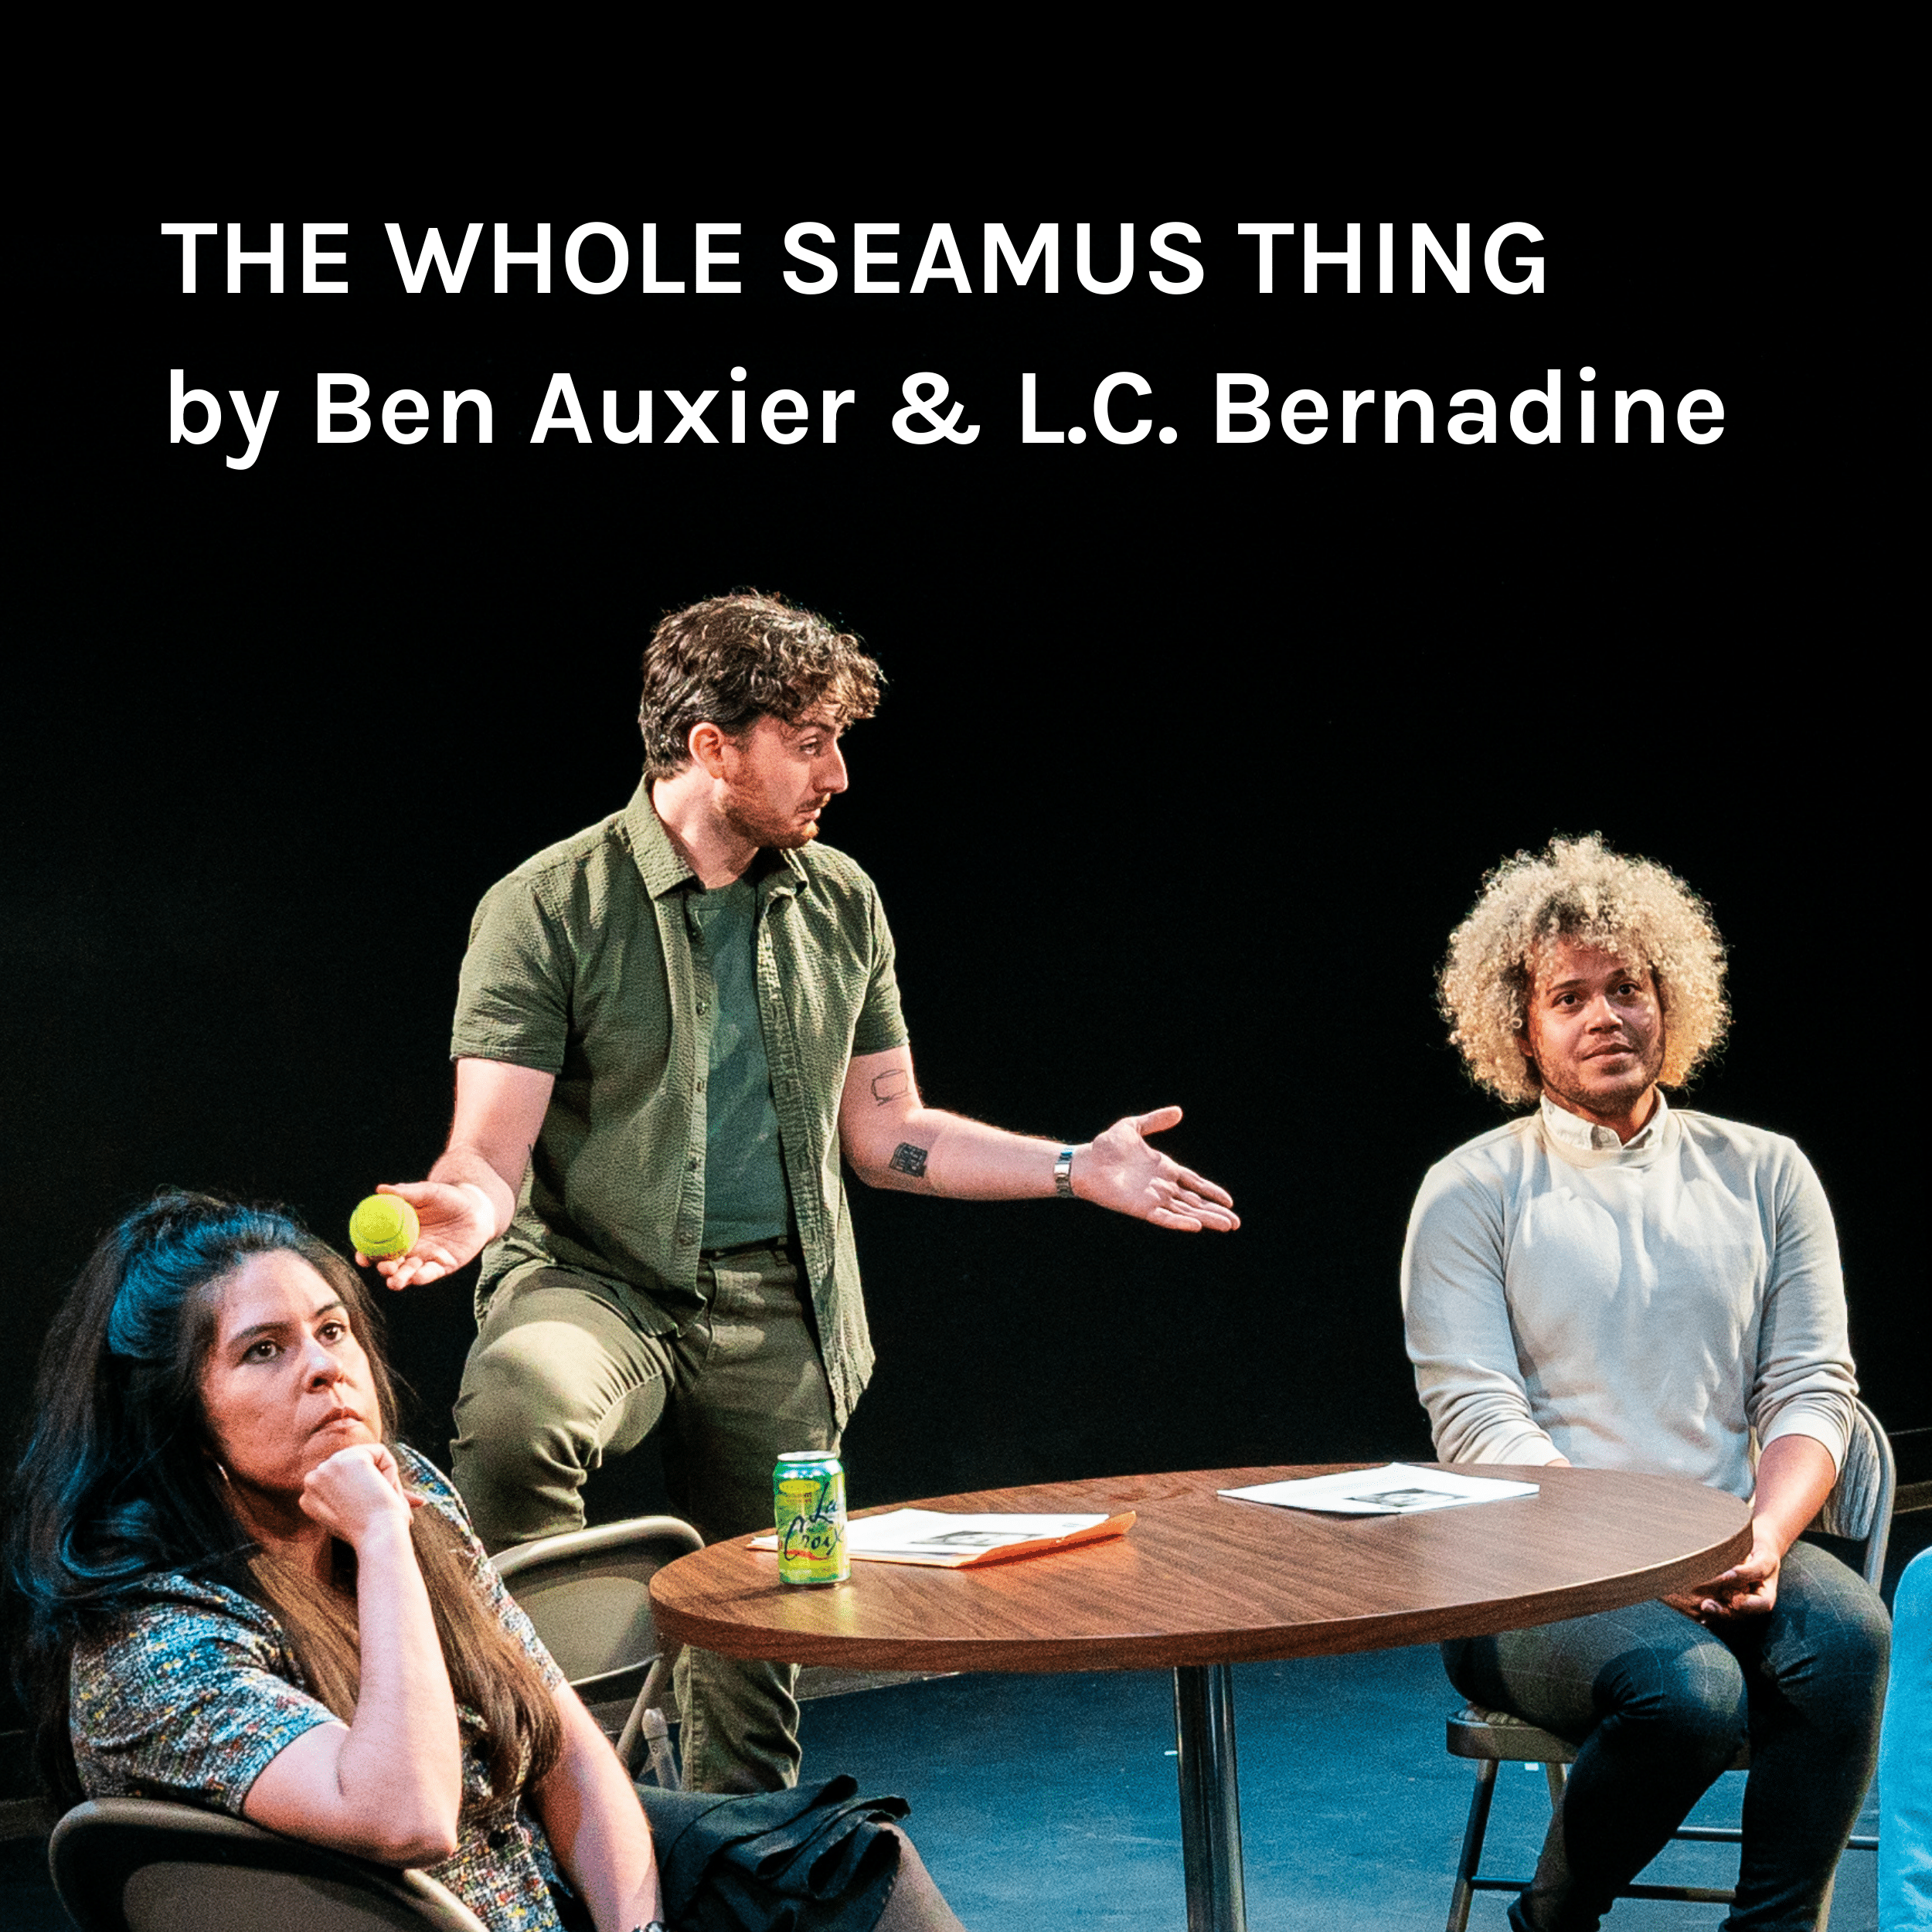 The Whole Seamus Thing by Ben Auxier and L.C. Bernadine